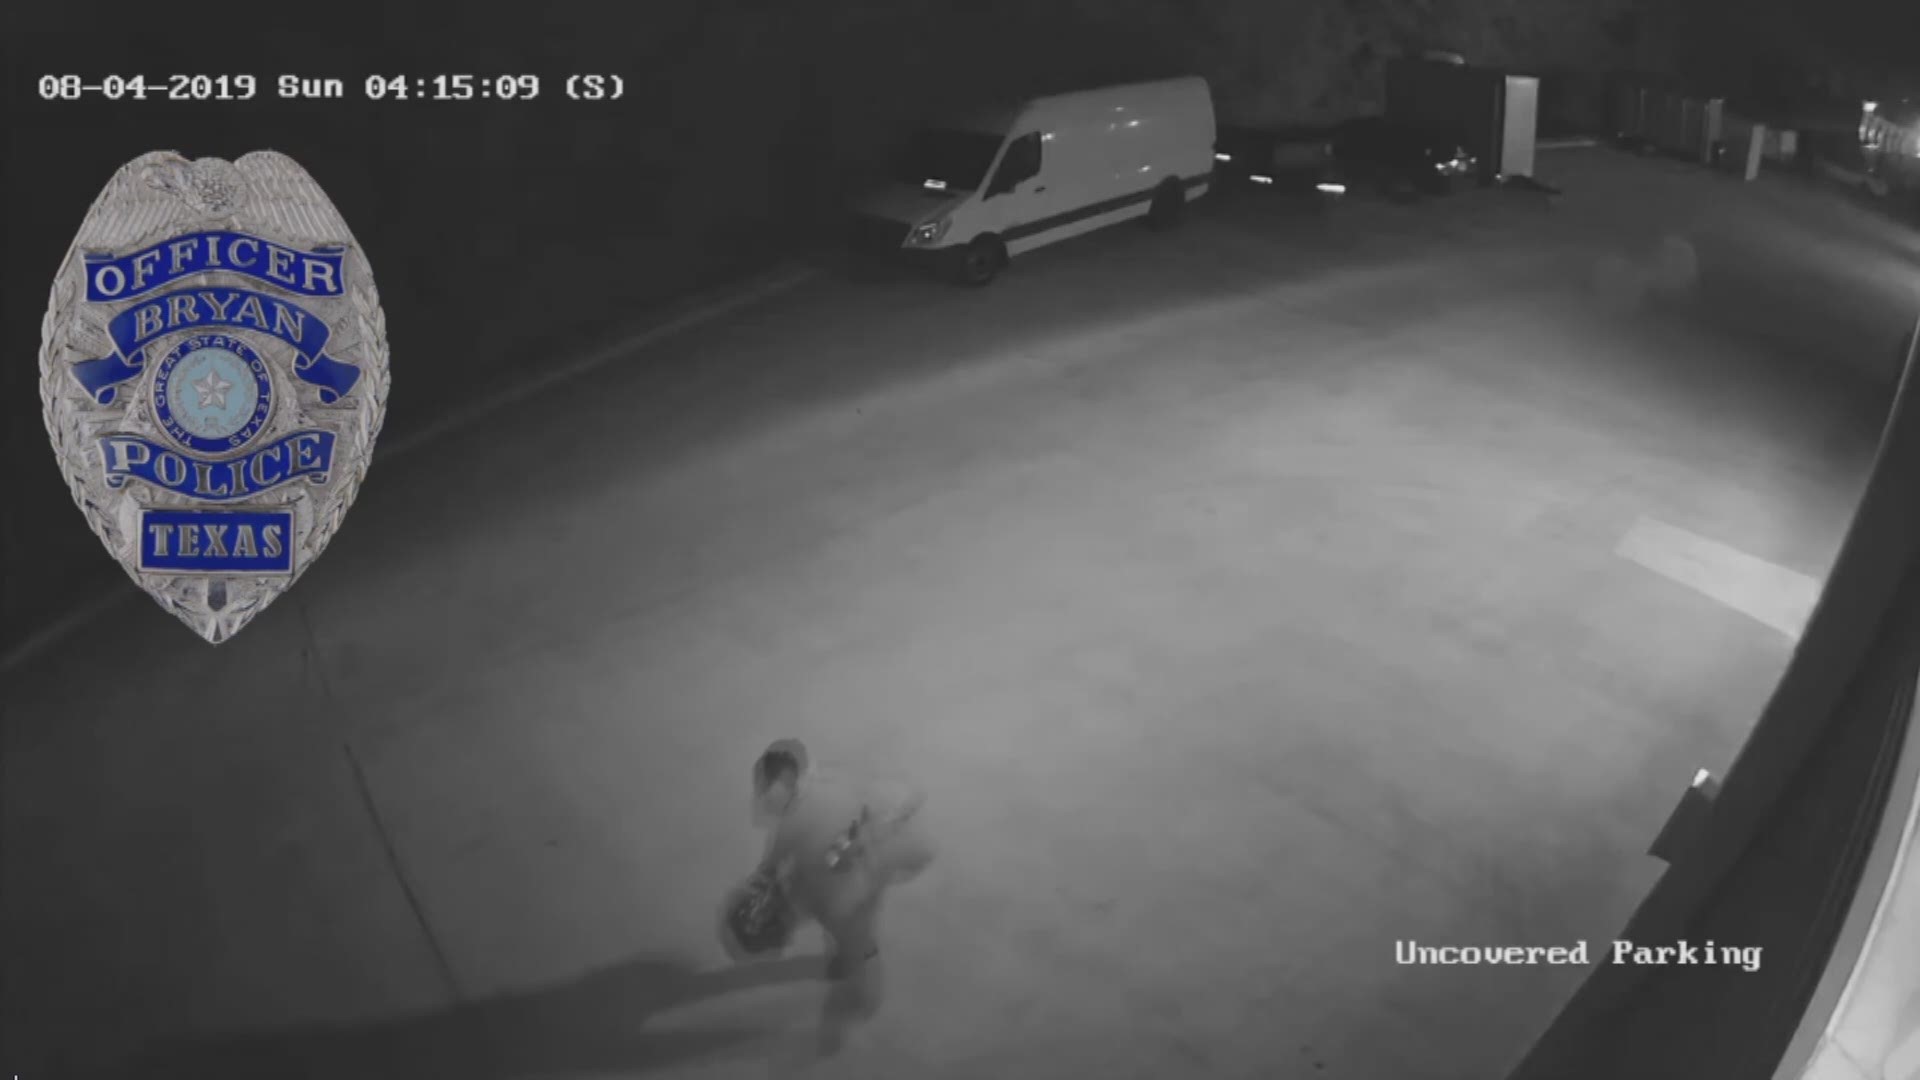 Bryan police said the burglaries happened at the Morningstar Storage Facility back in August of 2019.